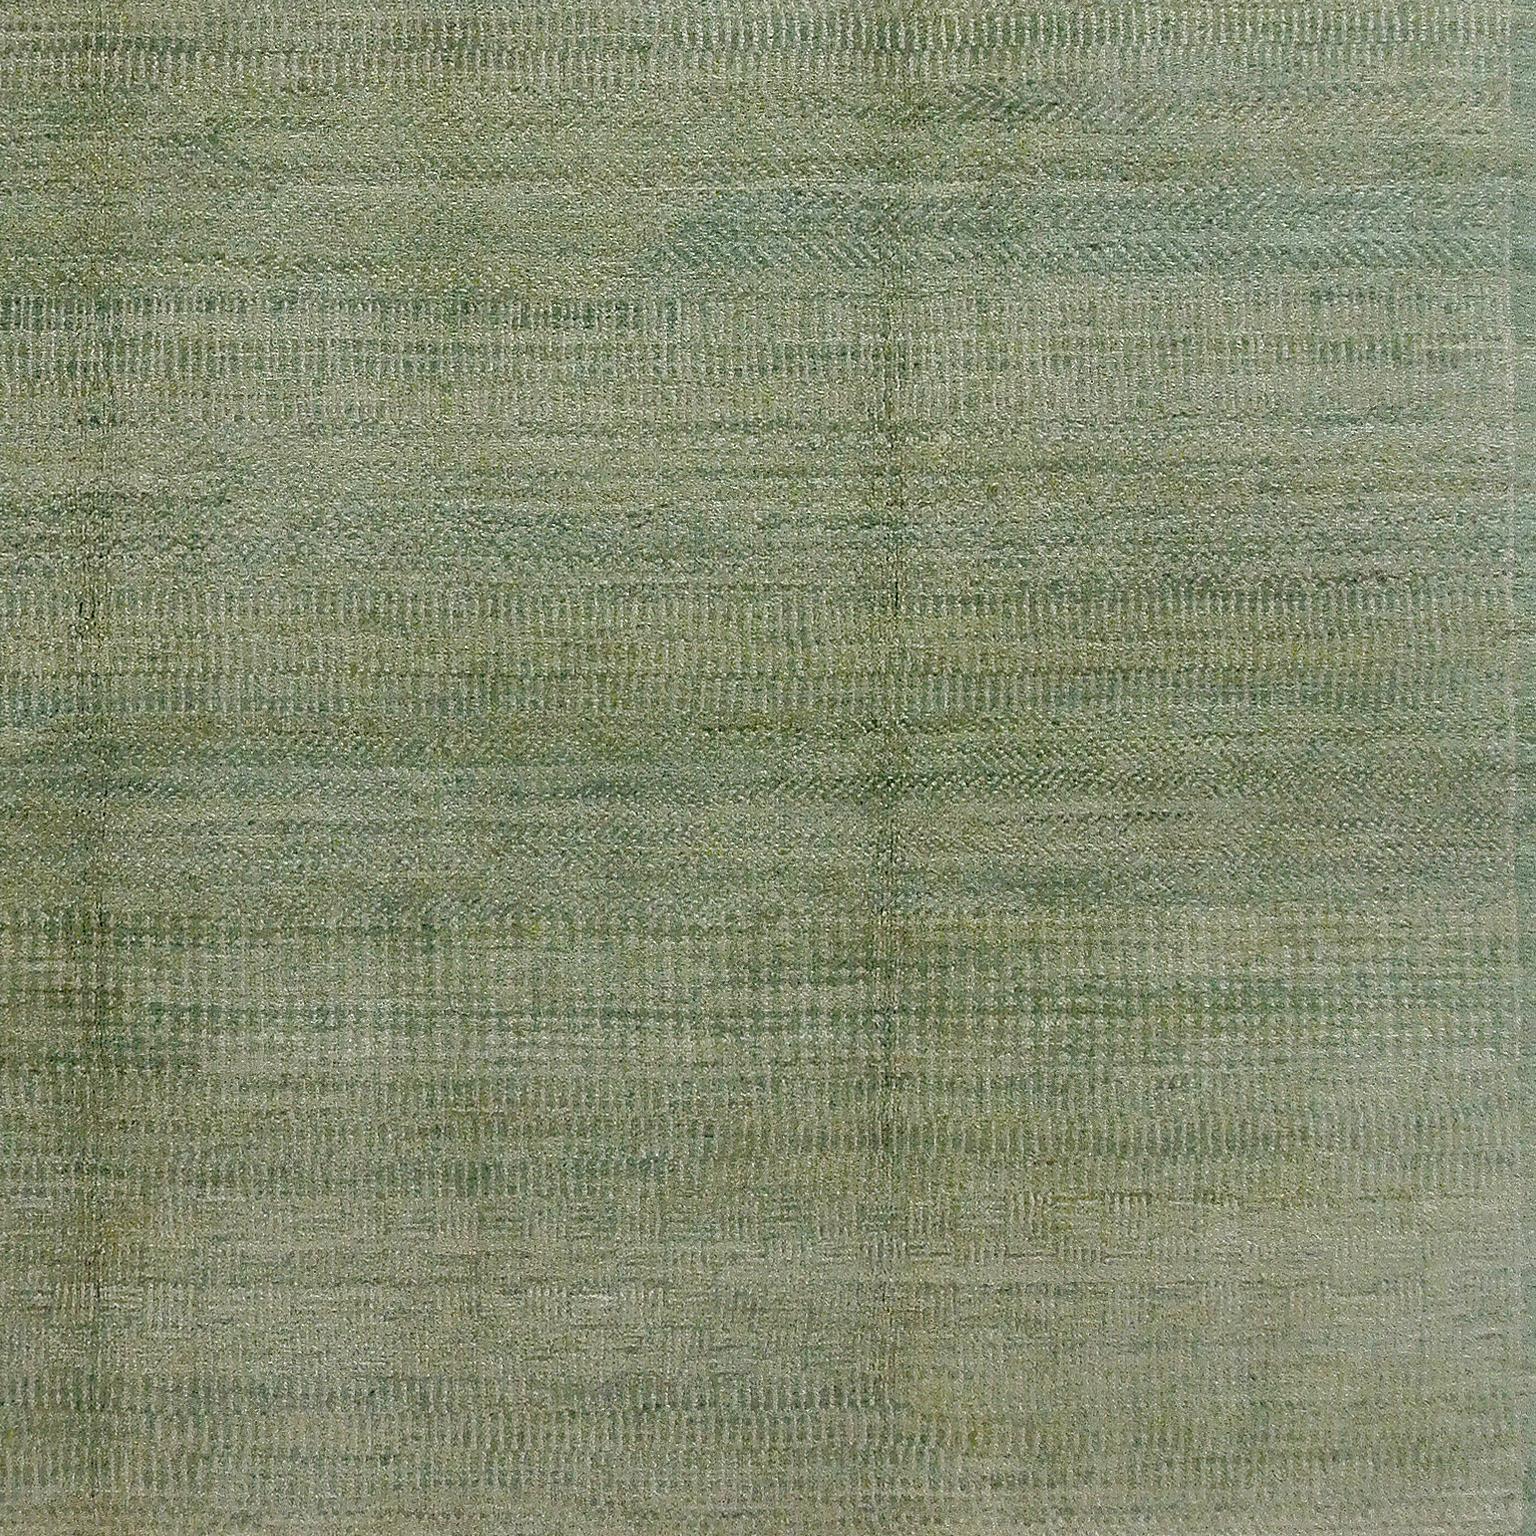 Orley Shabahang Modern Wool Persian Rug, Blue and Green, 5' x 7' In New Condition For Sale In New York, NY